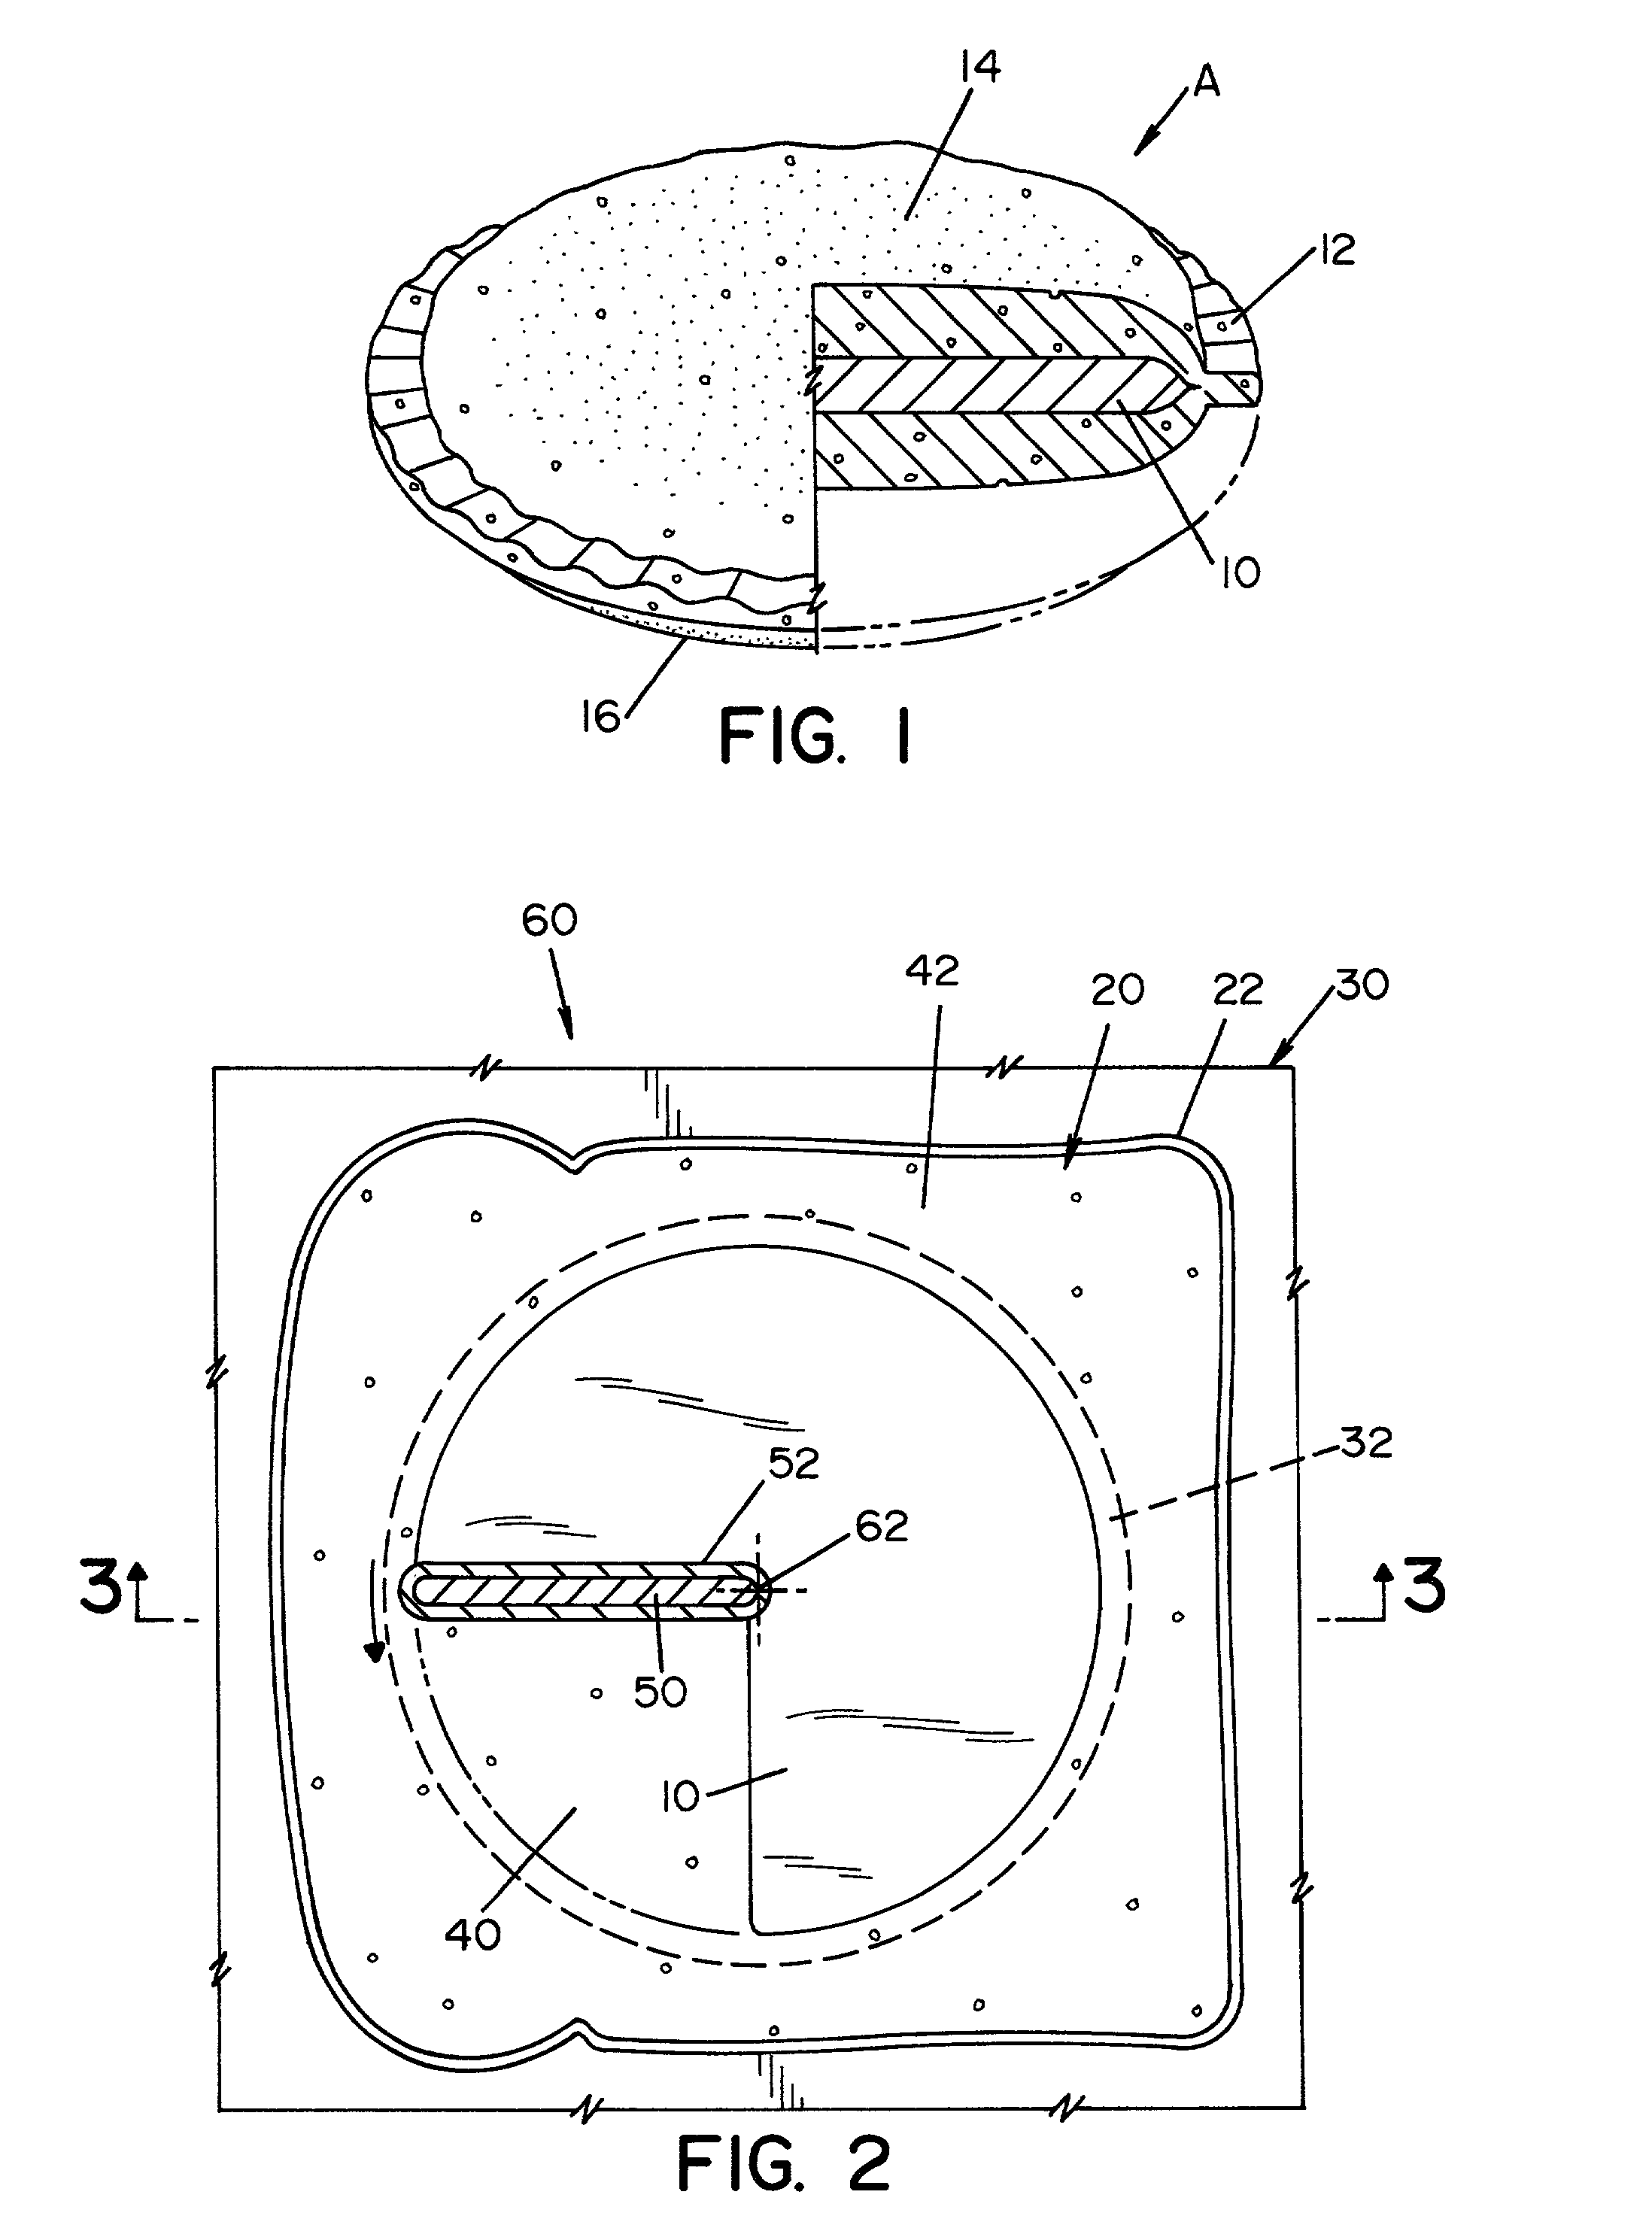 Frozen sandwich and method of making same